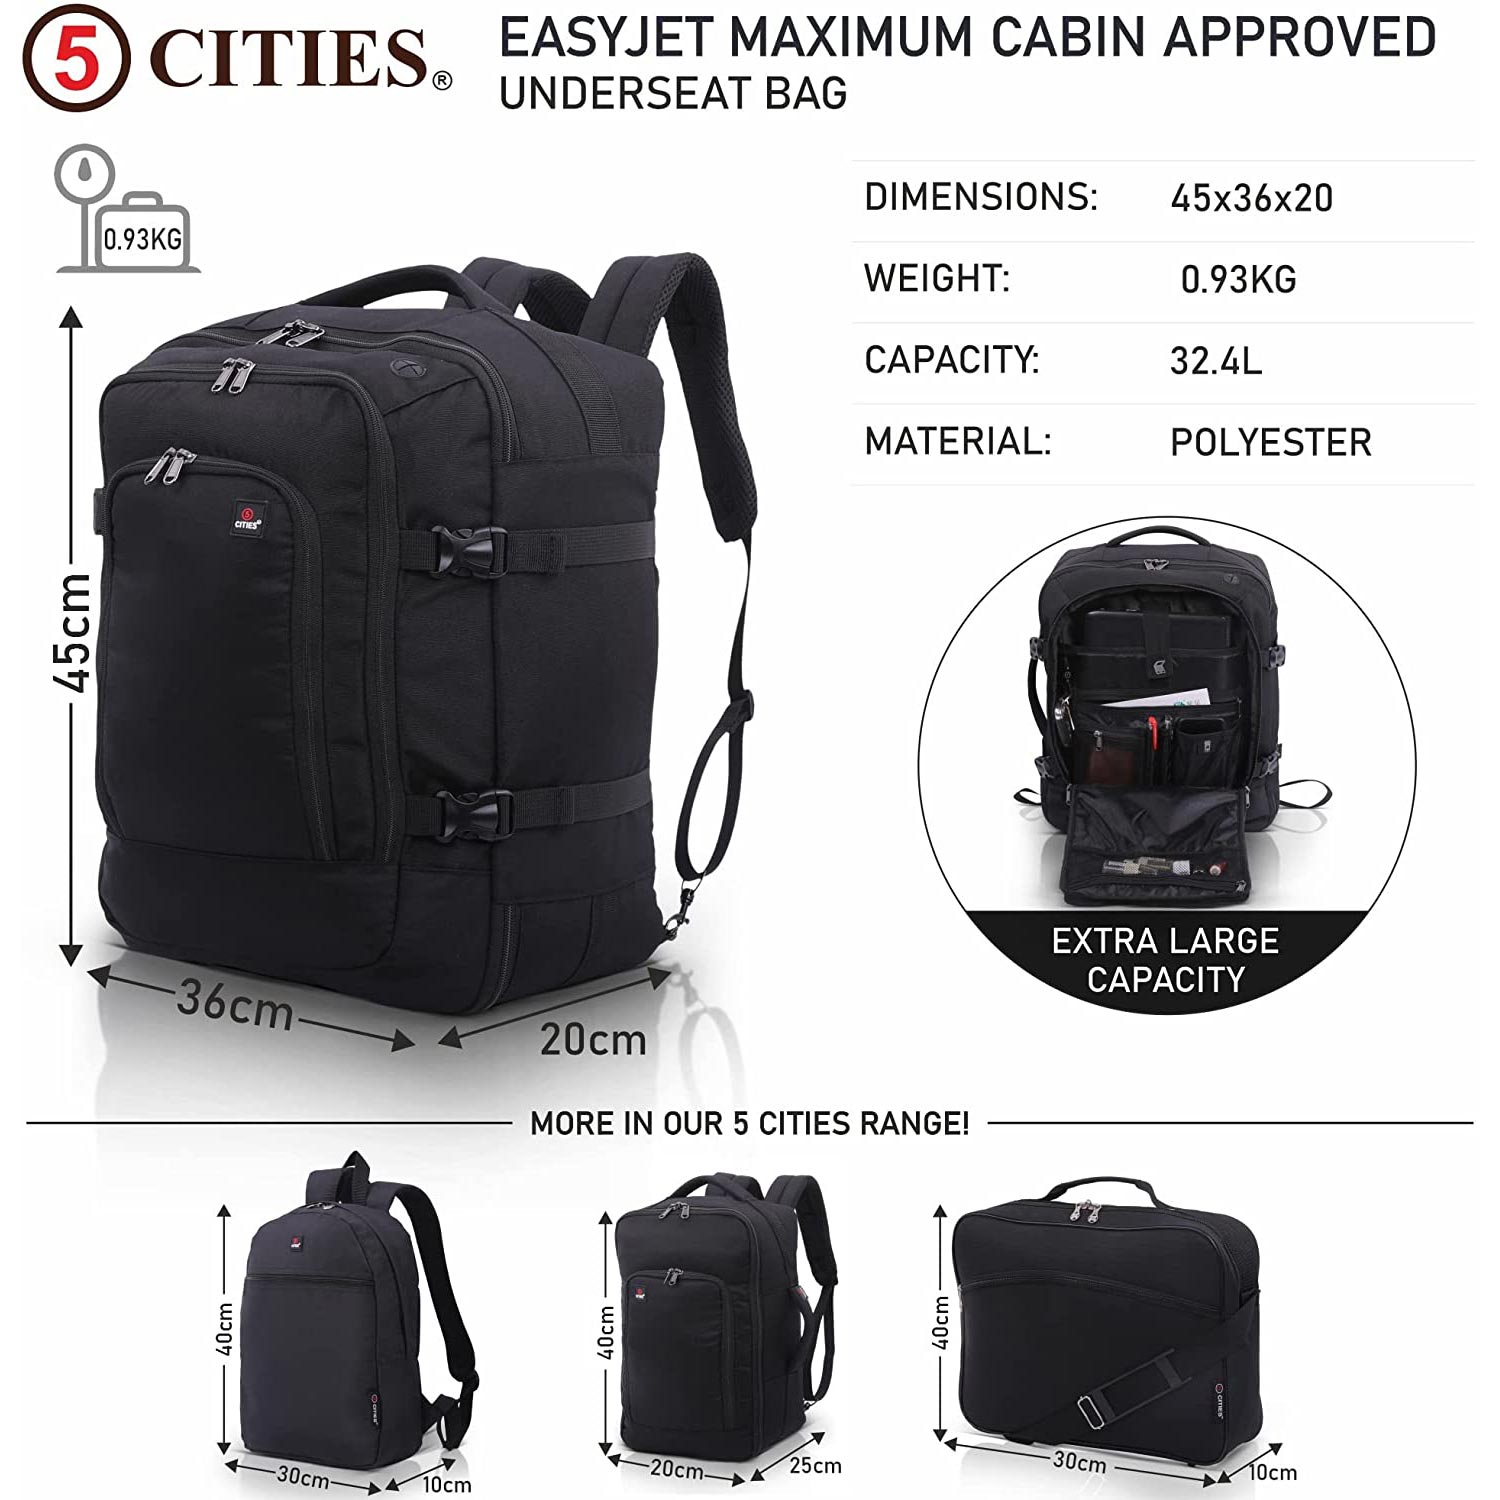 For Easyjet Cabin Bag 45x36x20 Fit New Easyjet Underseat Bag Carry